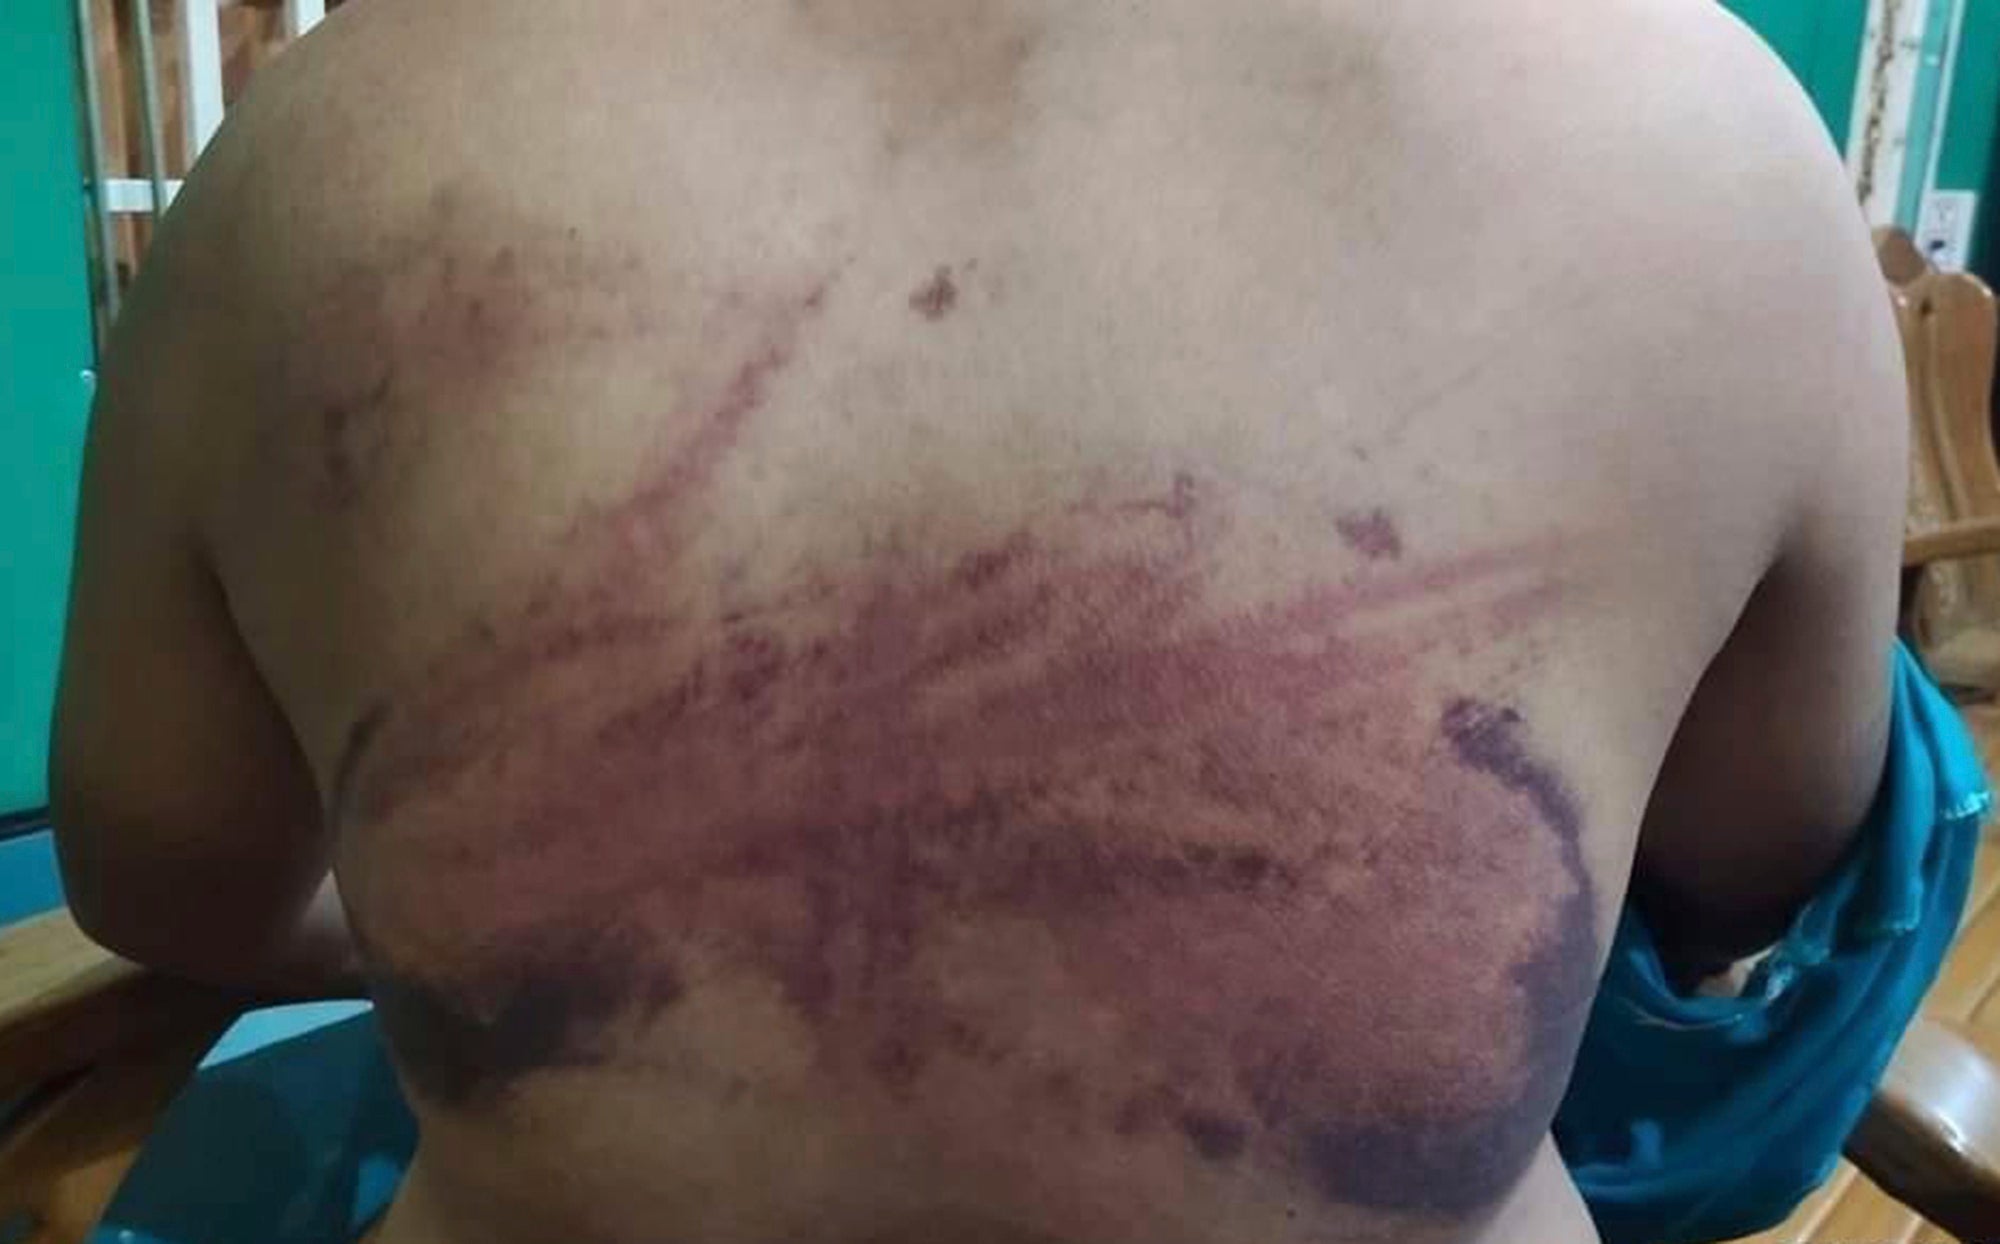 A man in his 20s allegedly tortured by Myanmar's military during an interrogation session in March 2021